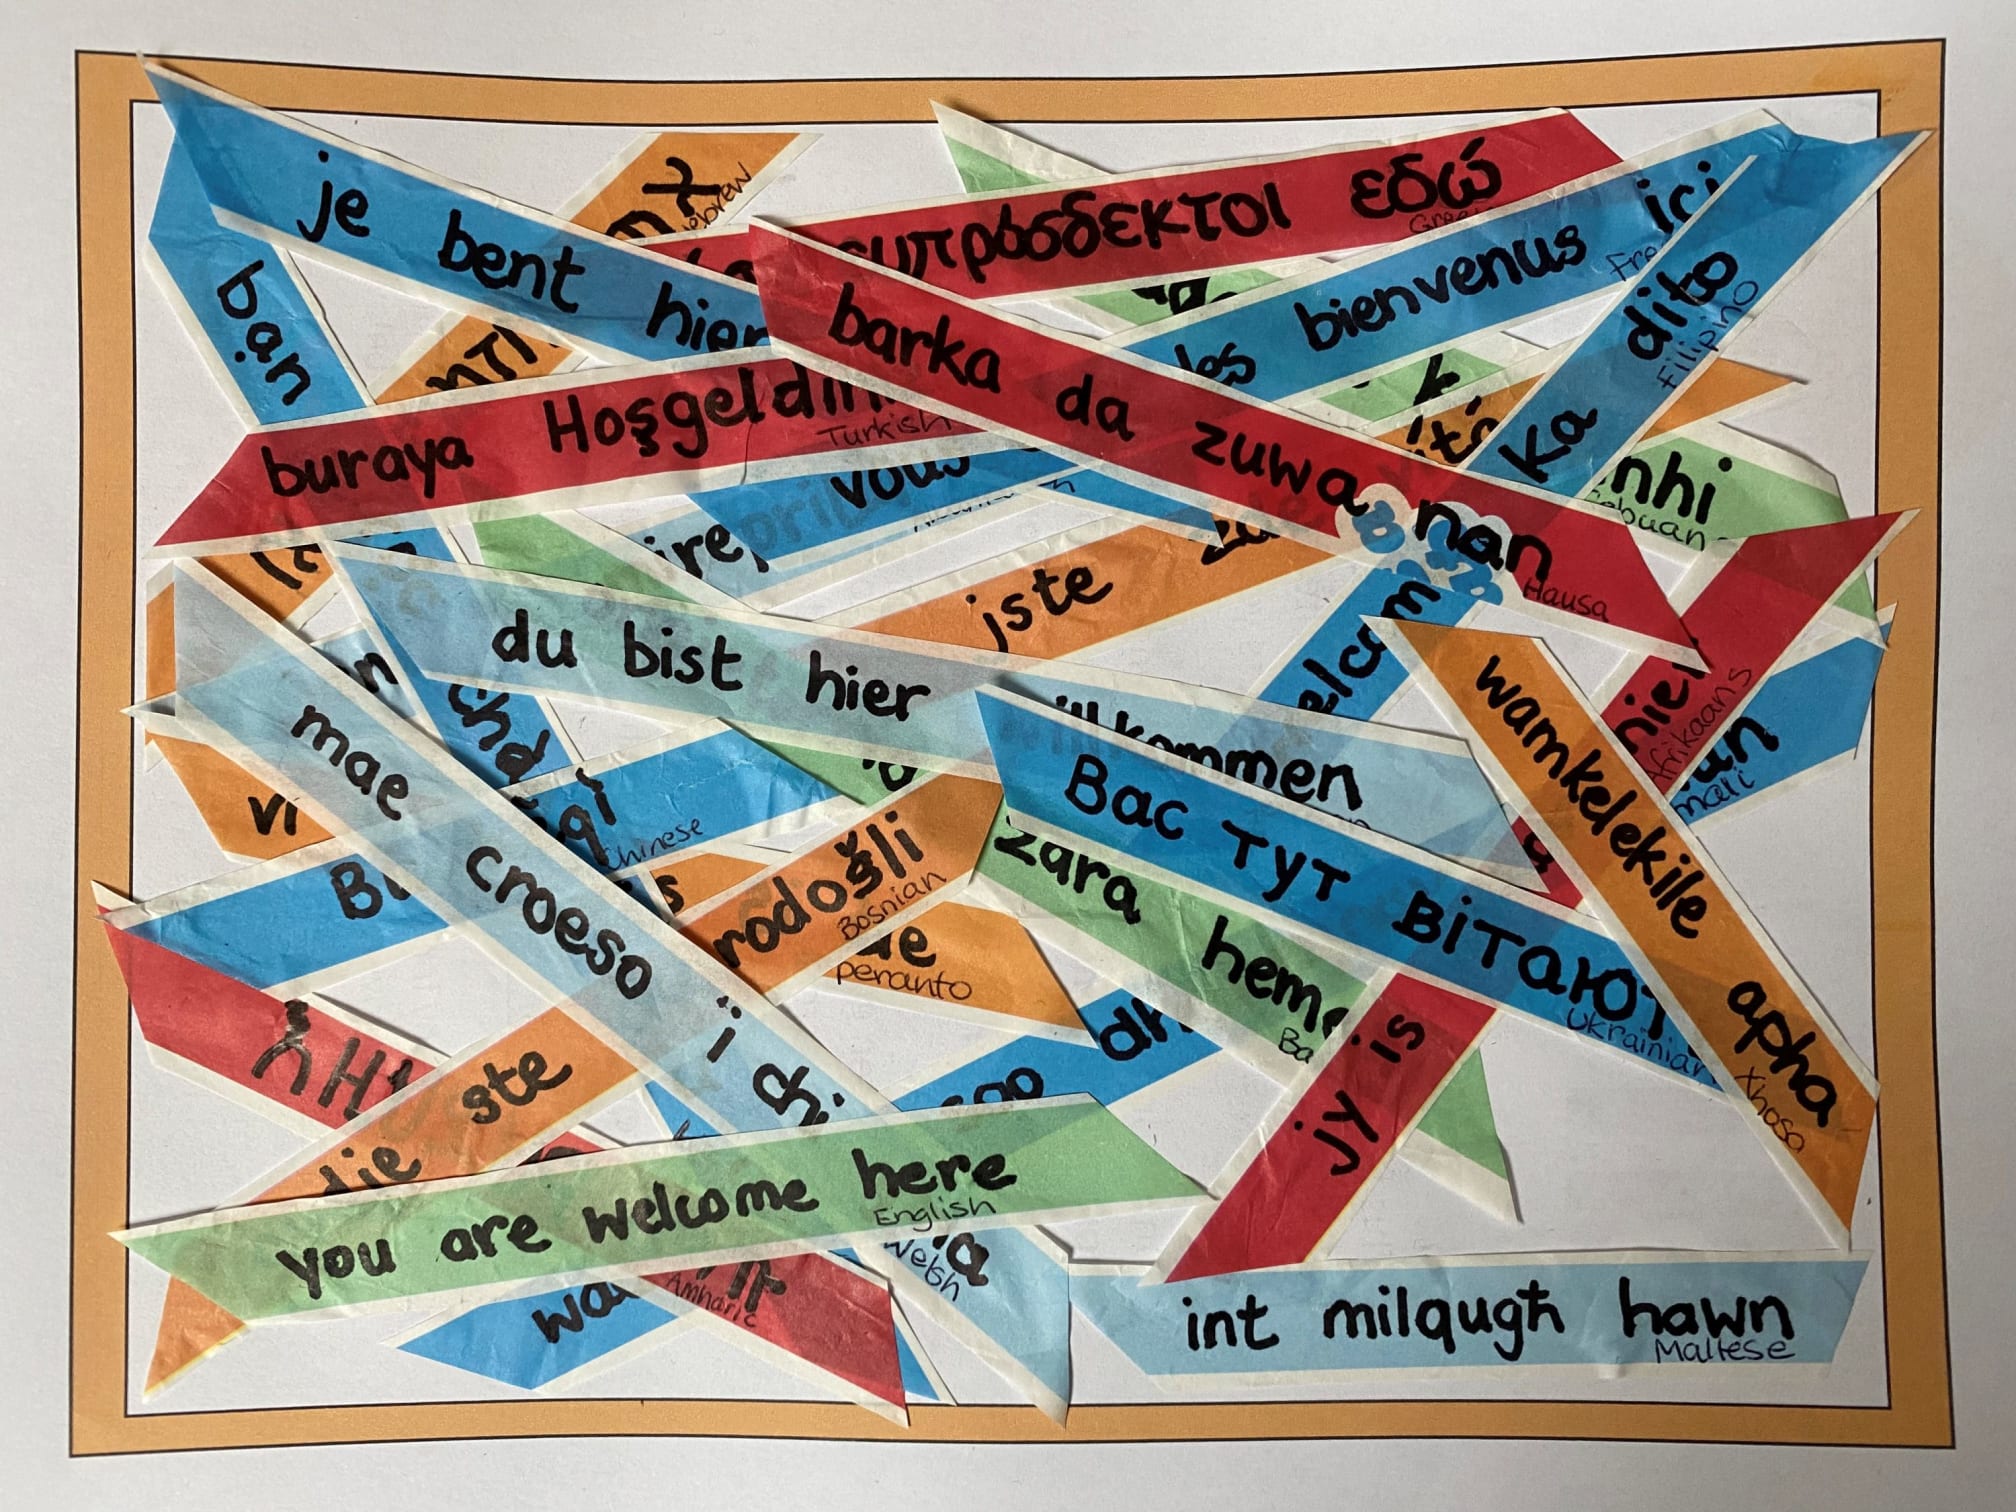 A collage, made by a client, featuring welcome messages in various langauges